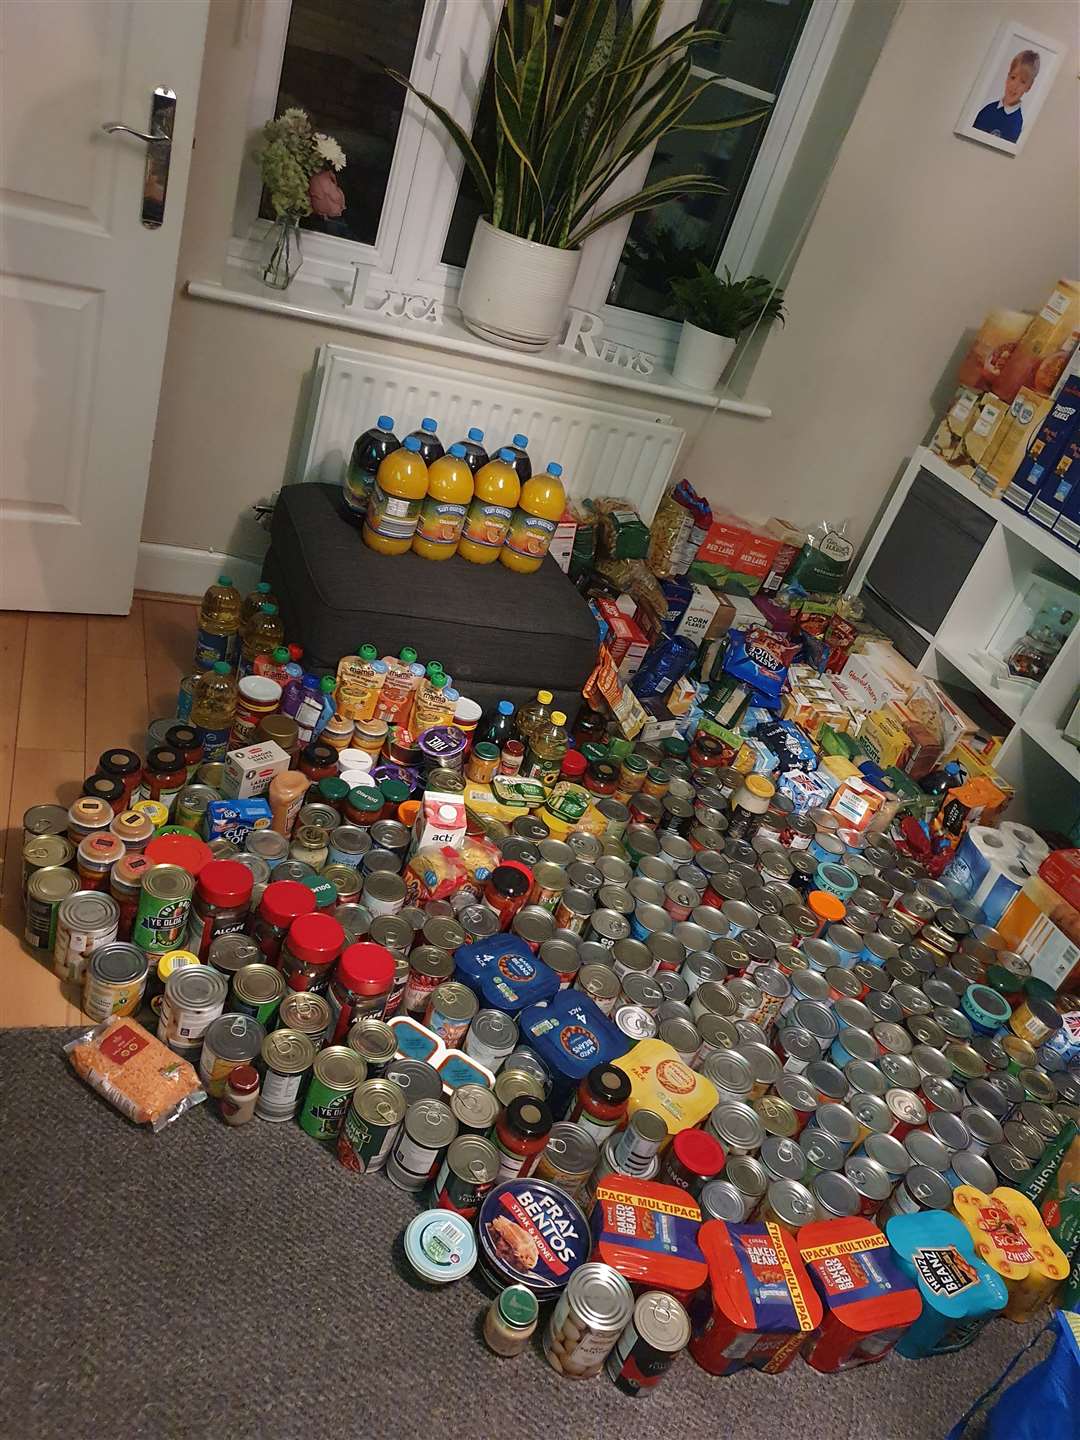 Just some of the mountain of good the family collected